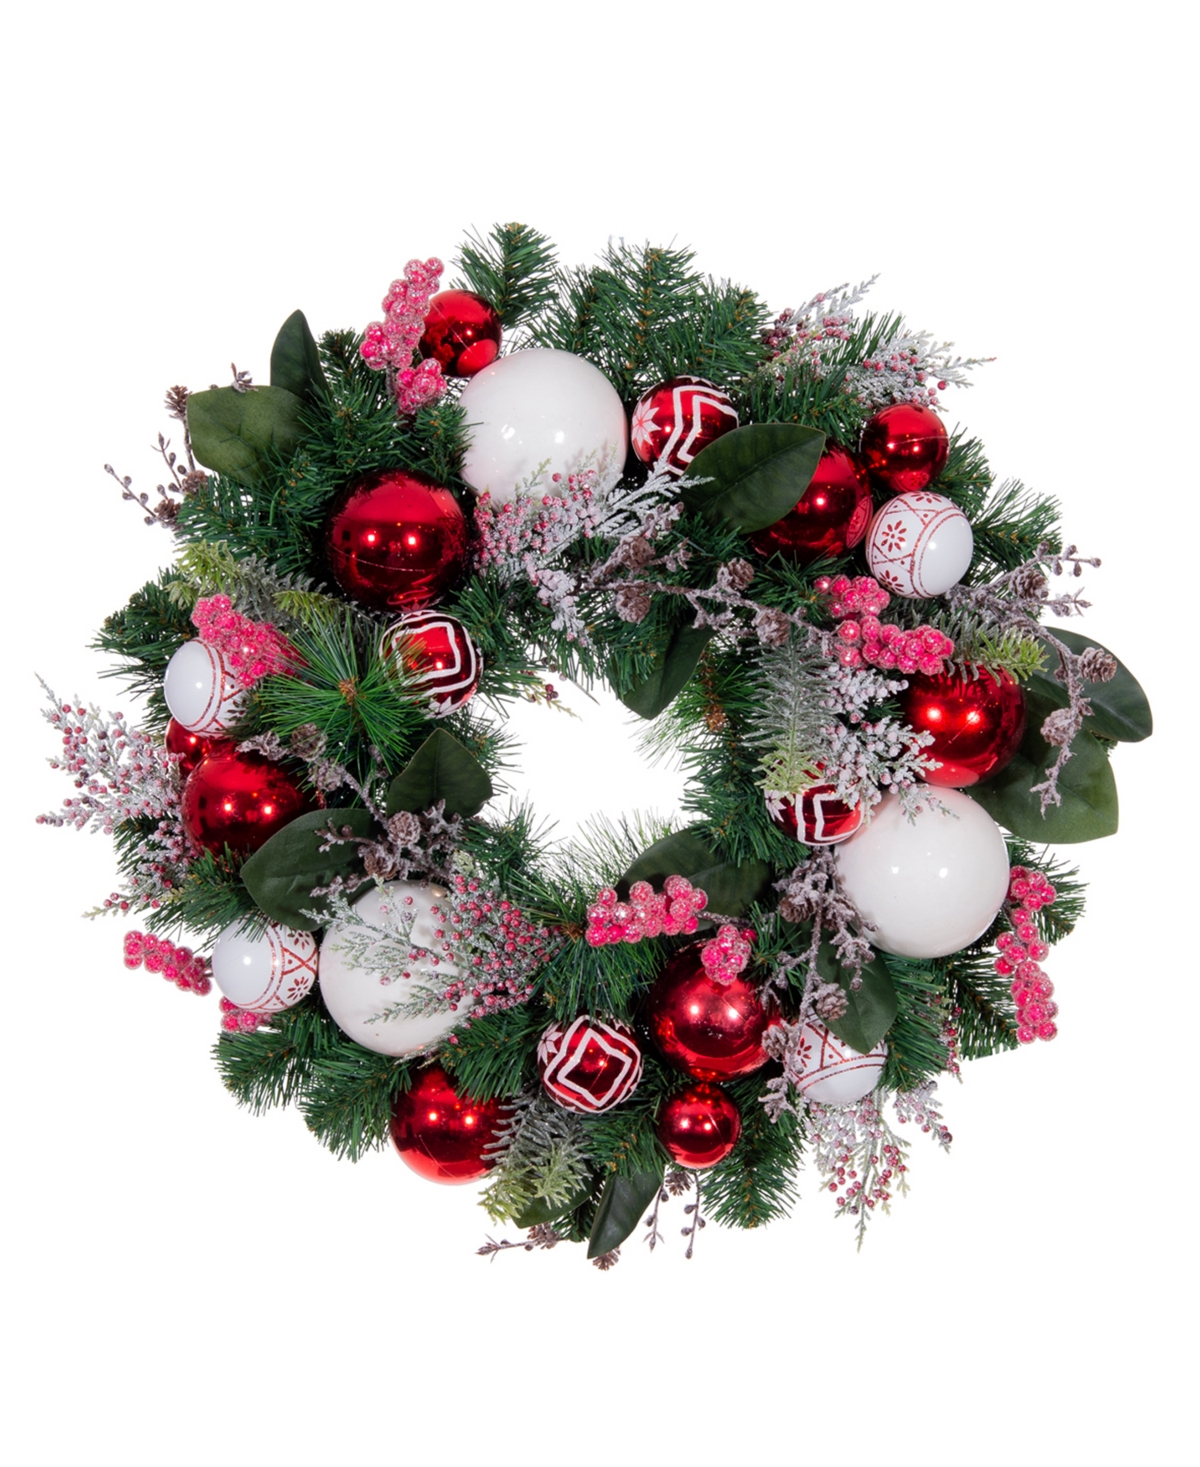 24" Lighted Christmas Wreath, Nordic - Assorted